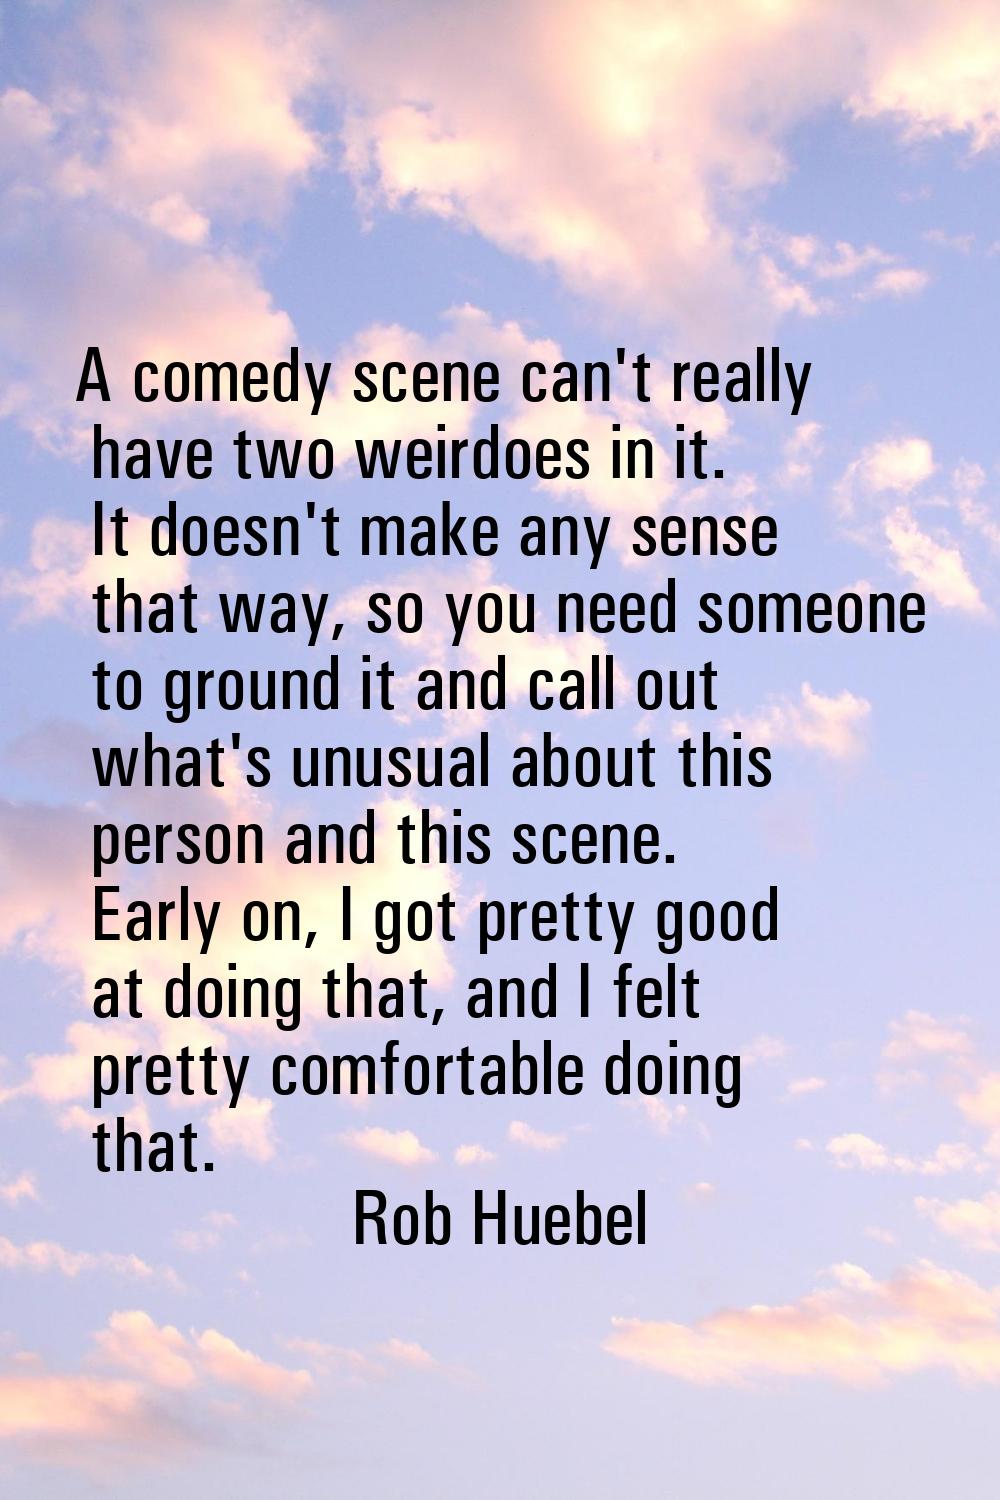 A comedy scene can't really have two weirdoes in it. It doesn't make any sense that way, so you nee